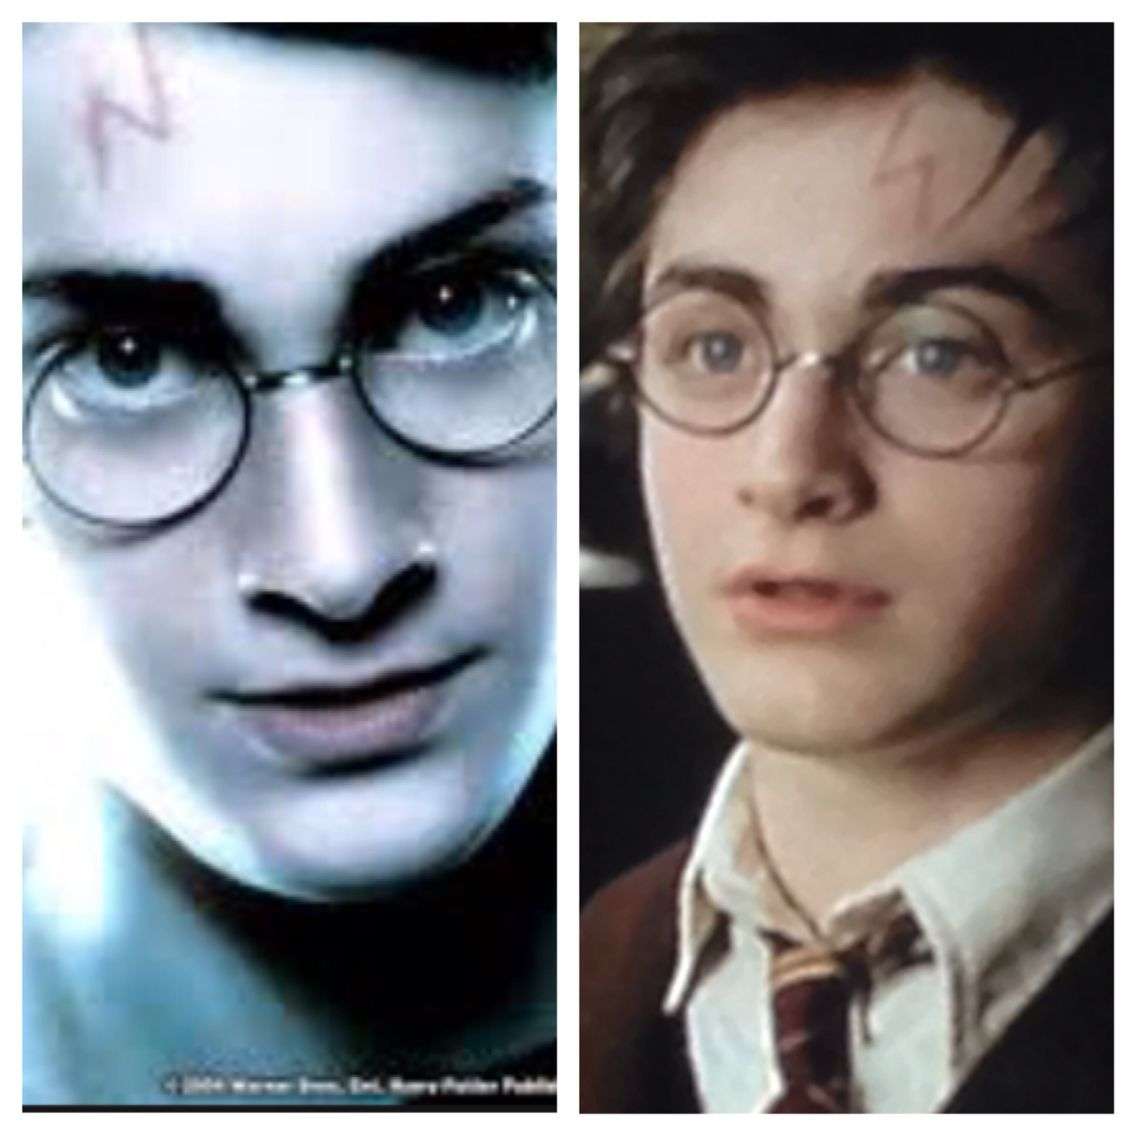 In Prisoner of Azkaban the scar is on the wrong side in ...